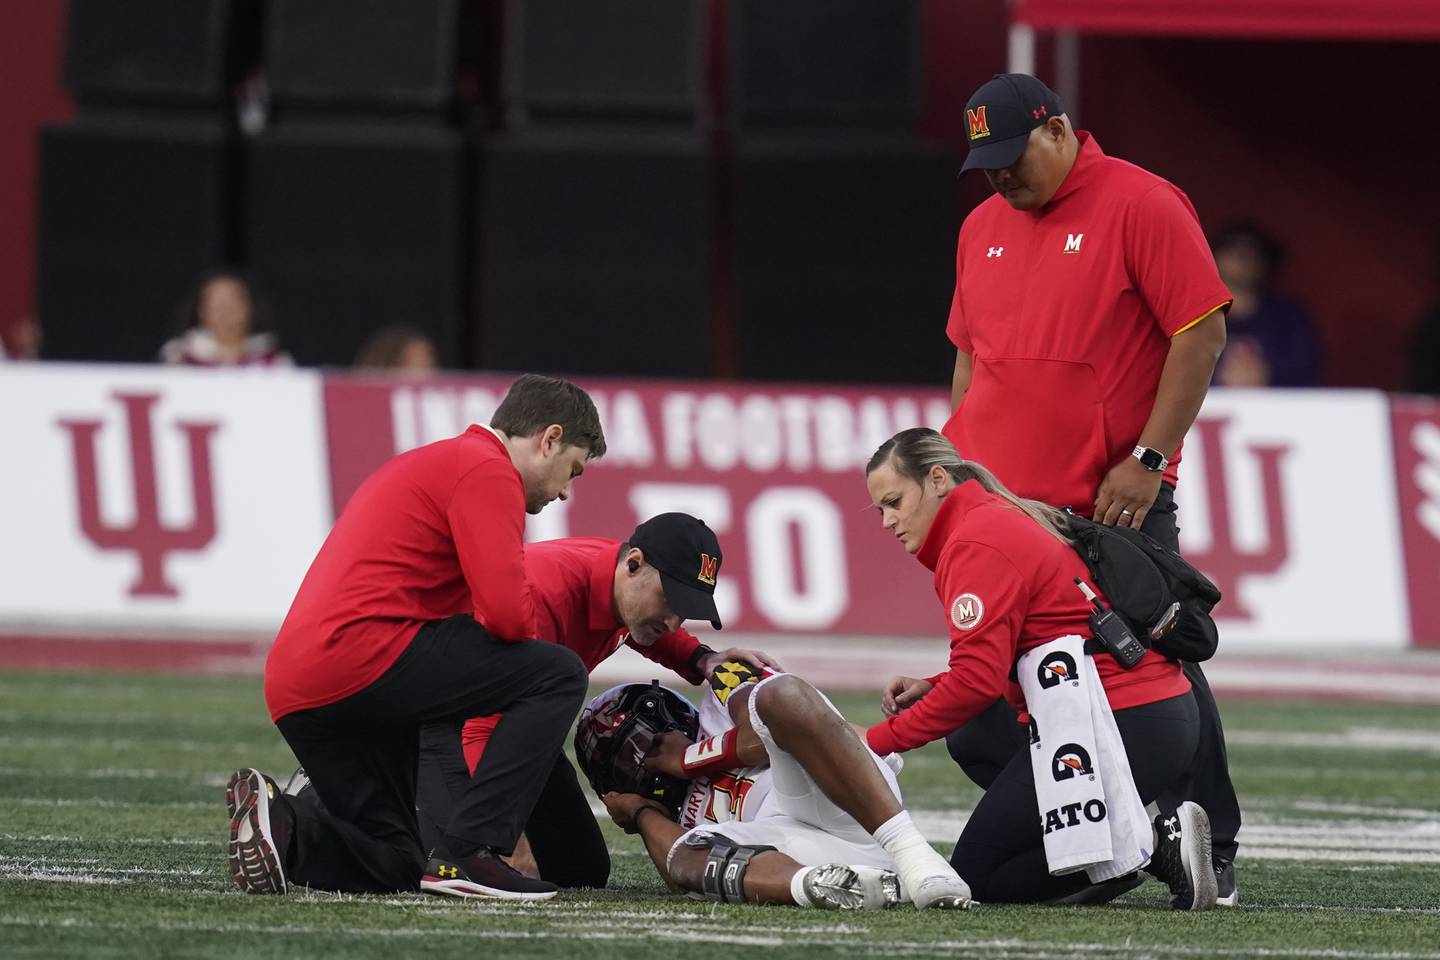 Taulia Tagovailoa, the Terps gunslinger being attended to by trainers in Bloomington against Indiana on Saturday, is considered a game-time decision against Northwestern this weekend after aggravating his sprained MCL.